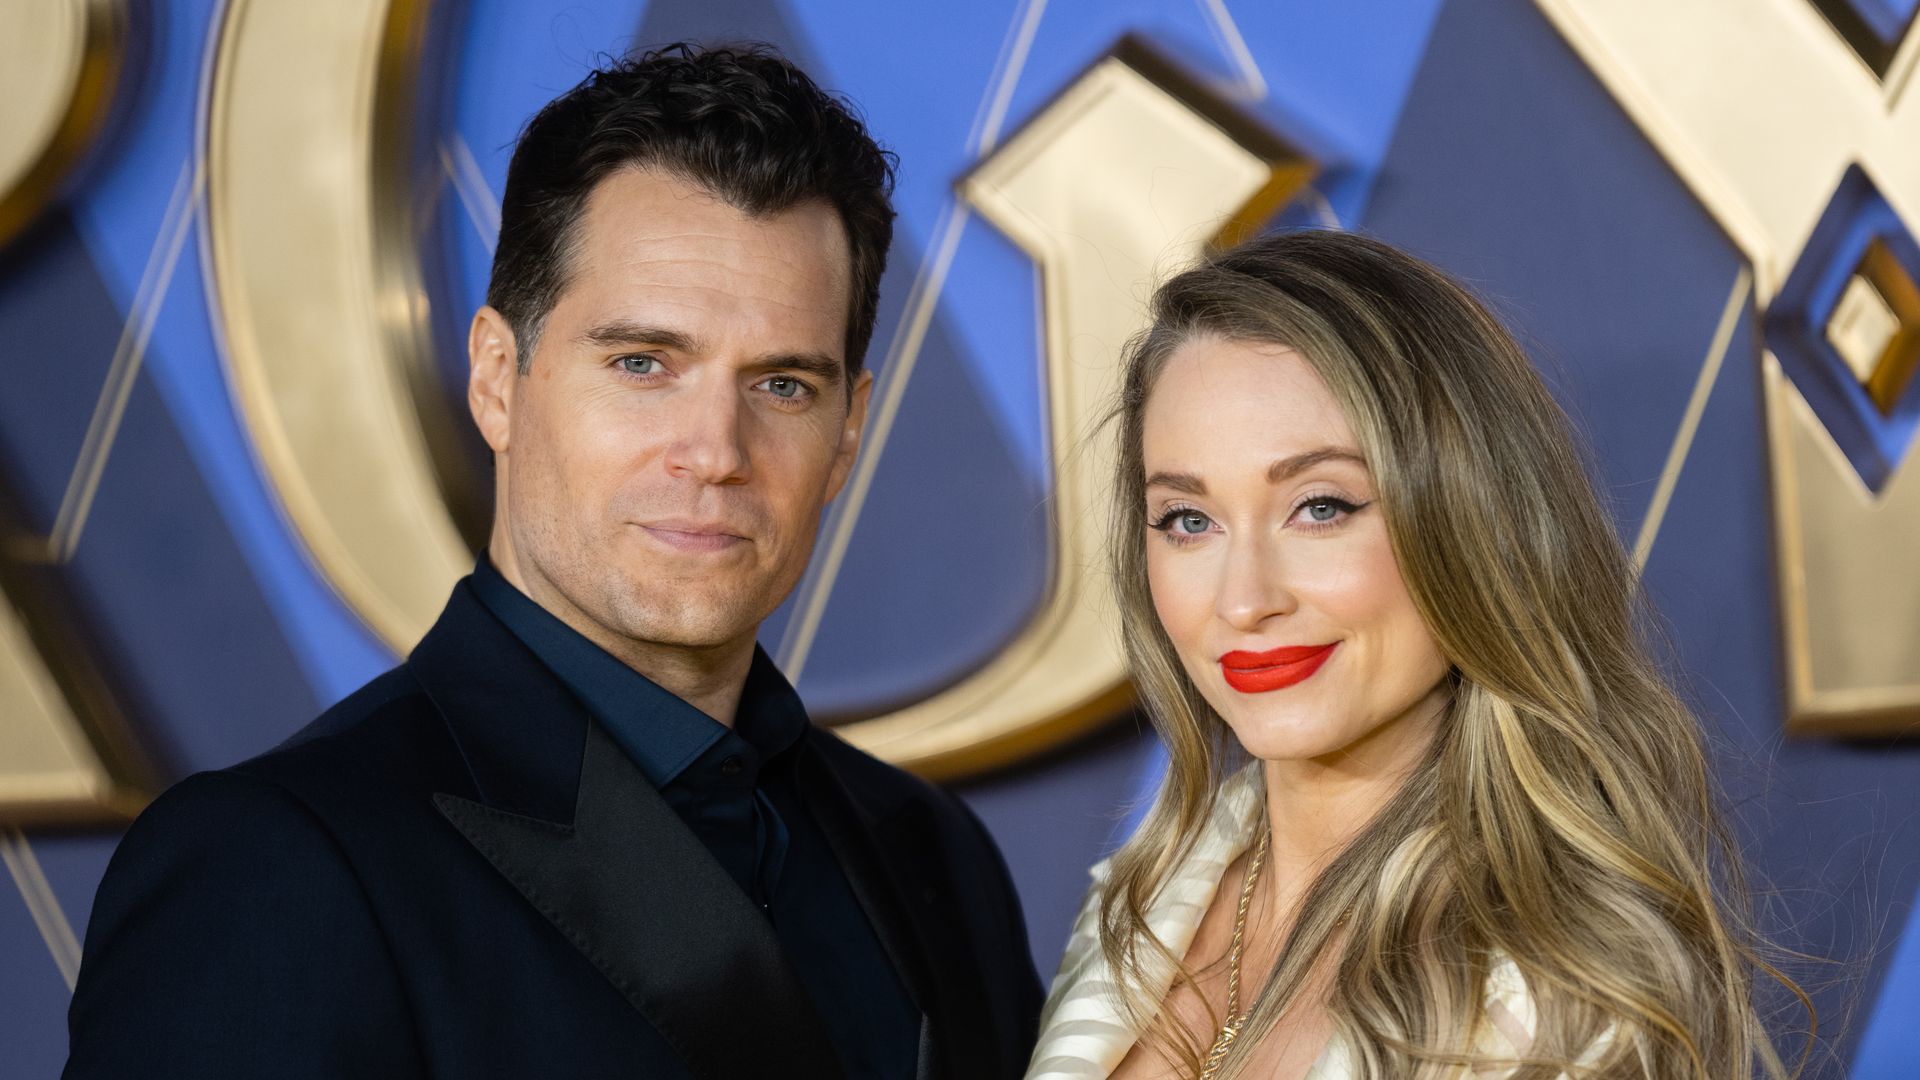 Henry Cavill 'excited' to become a dad after revealing girlfriend Natalie Viscuso's pregnancy